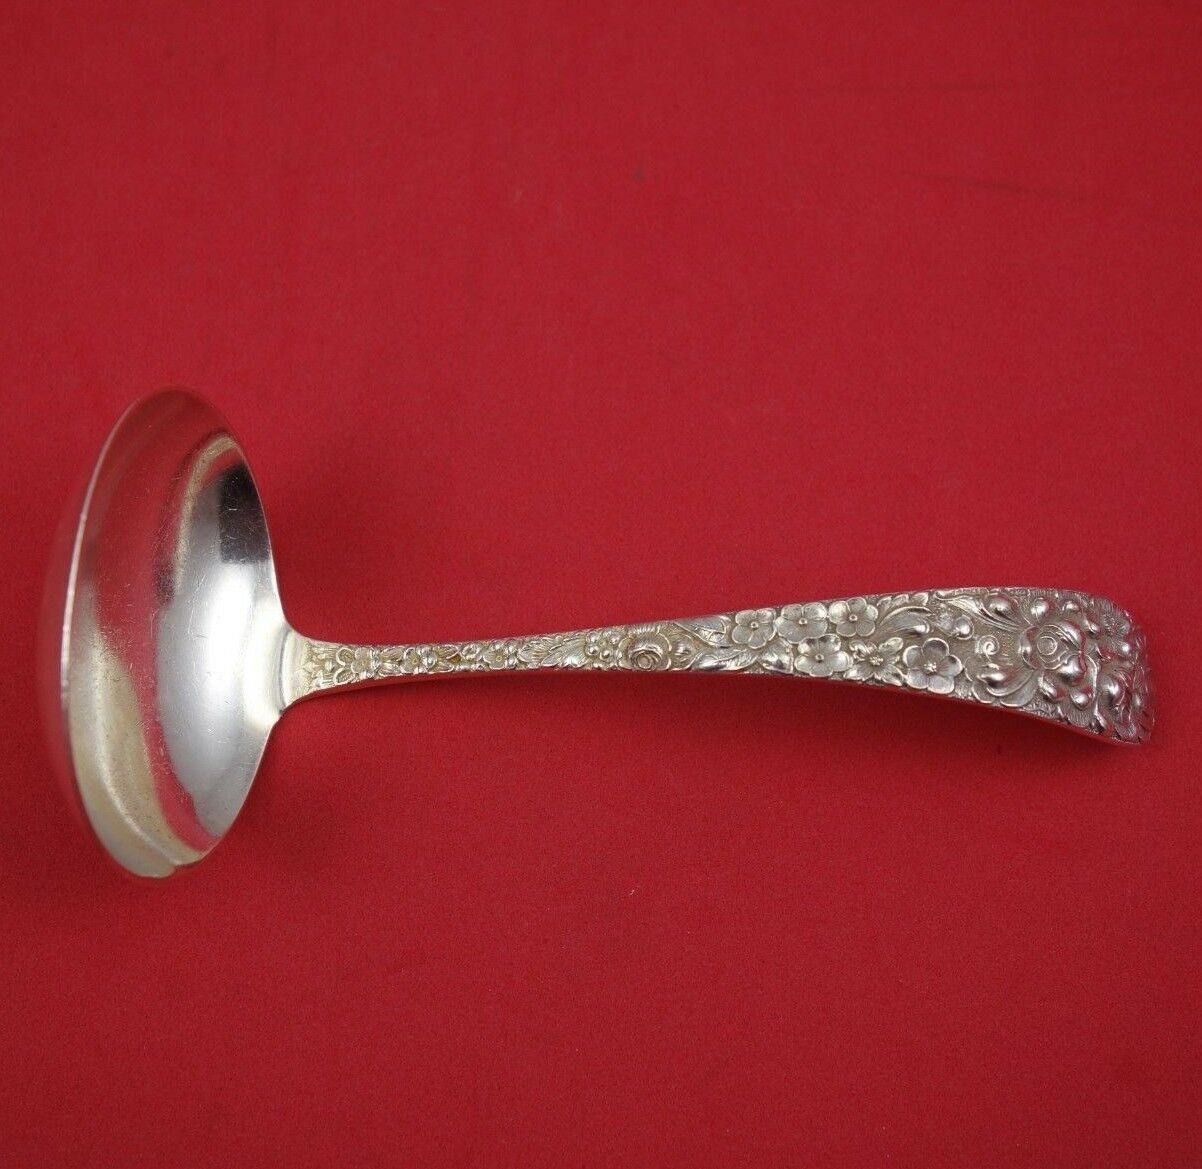 Primary image for Rose by Stieff Sterling Silver Cream Ladle 5 1/2" Serving